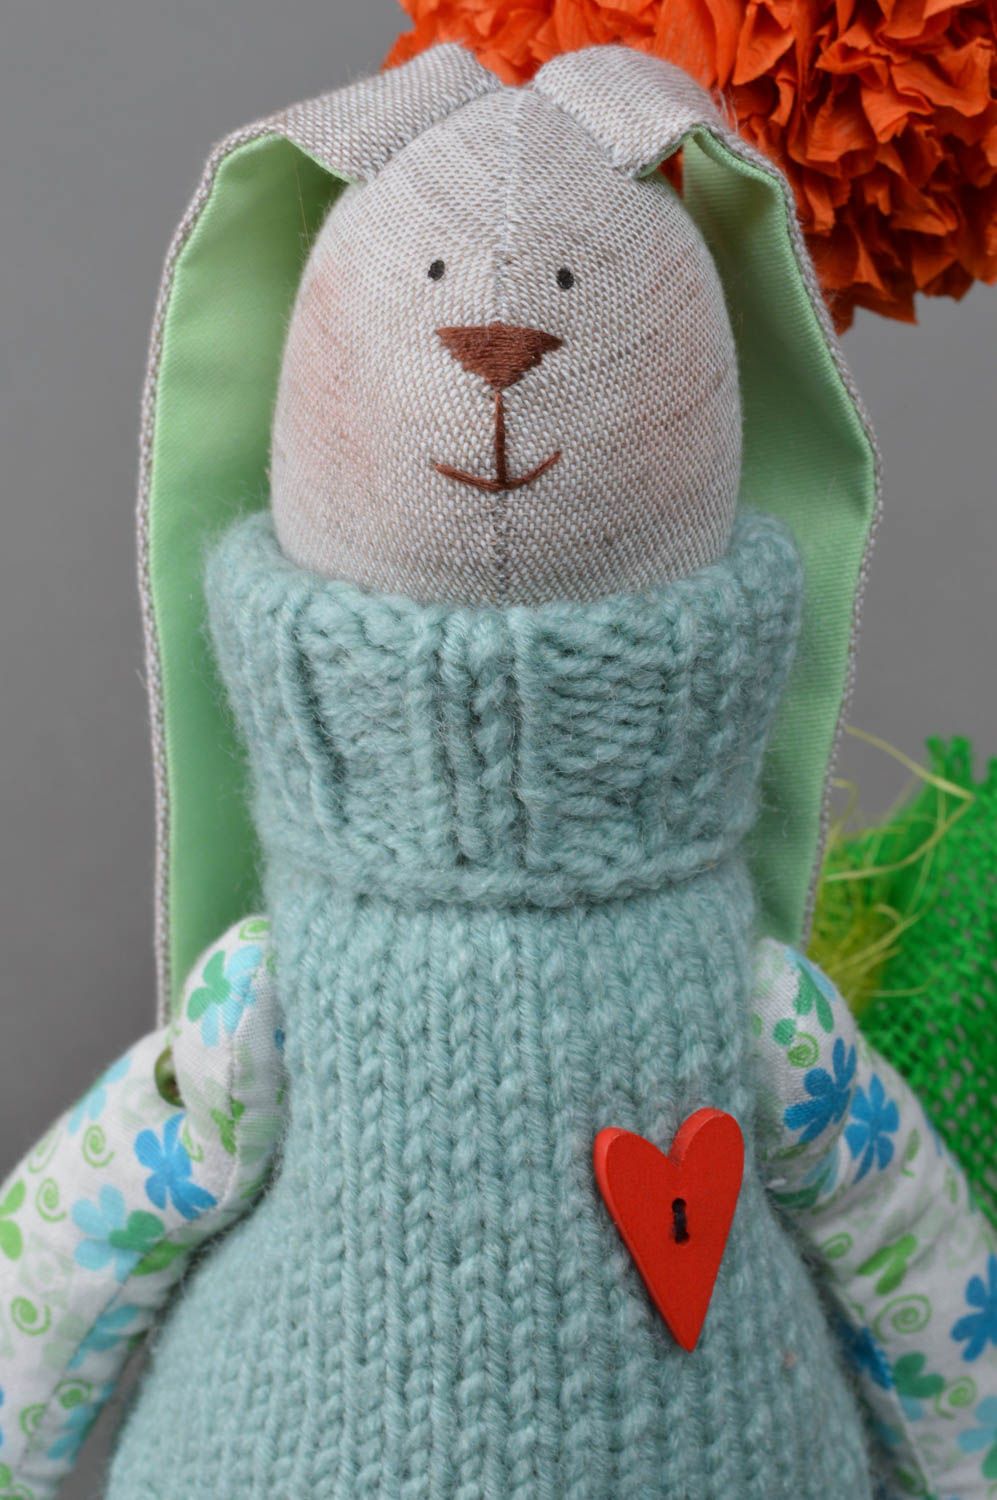 Handmade decorative soft toy bunny made of flax in knitted vest designer doll photo 2